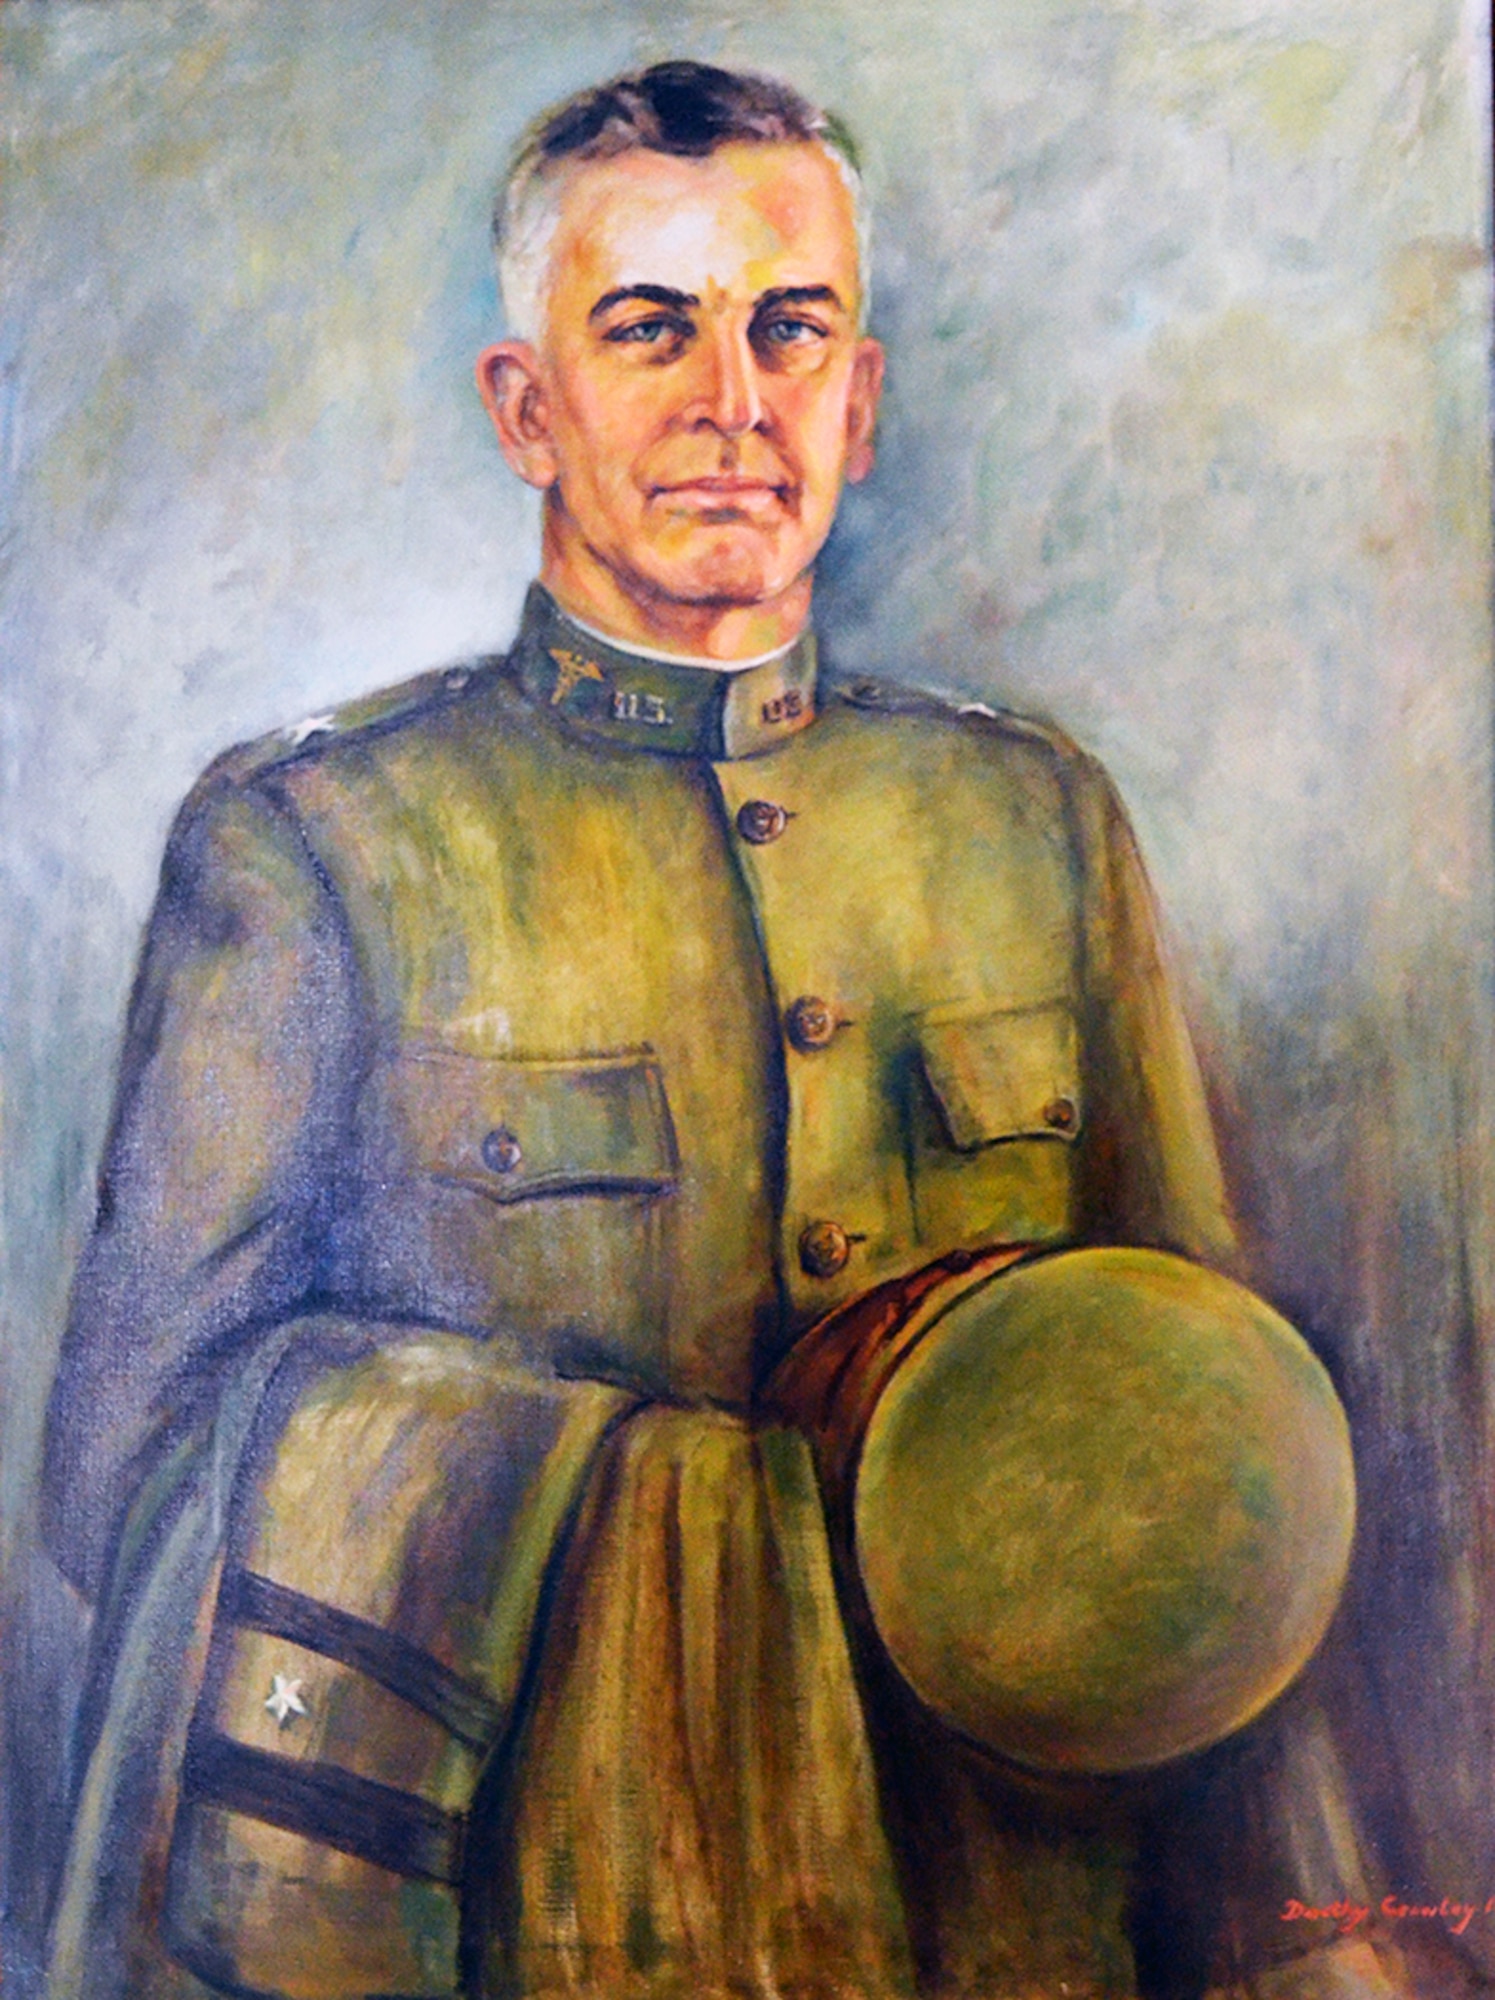 Portrait of Lt. Col. (Dr.) Theodore C. Lyster, Chief Surgeon, Aviation Section of the Signal Corps and often called the father of aviation medicine.